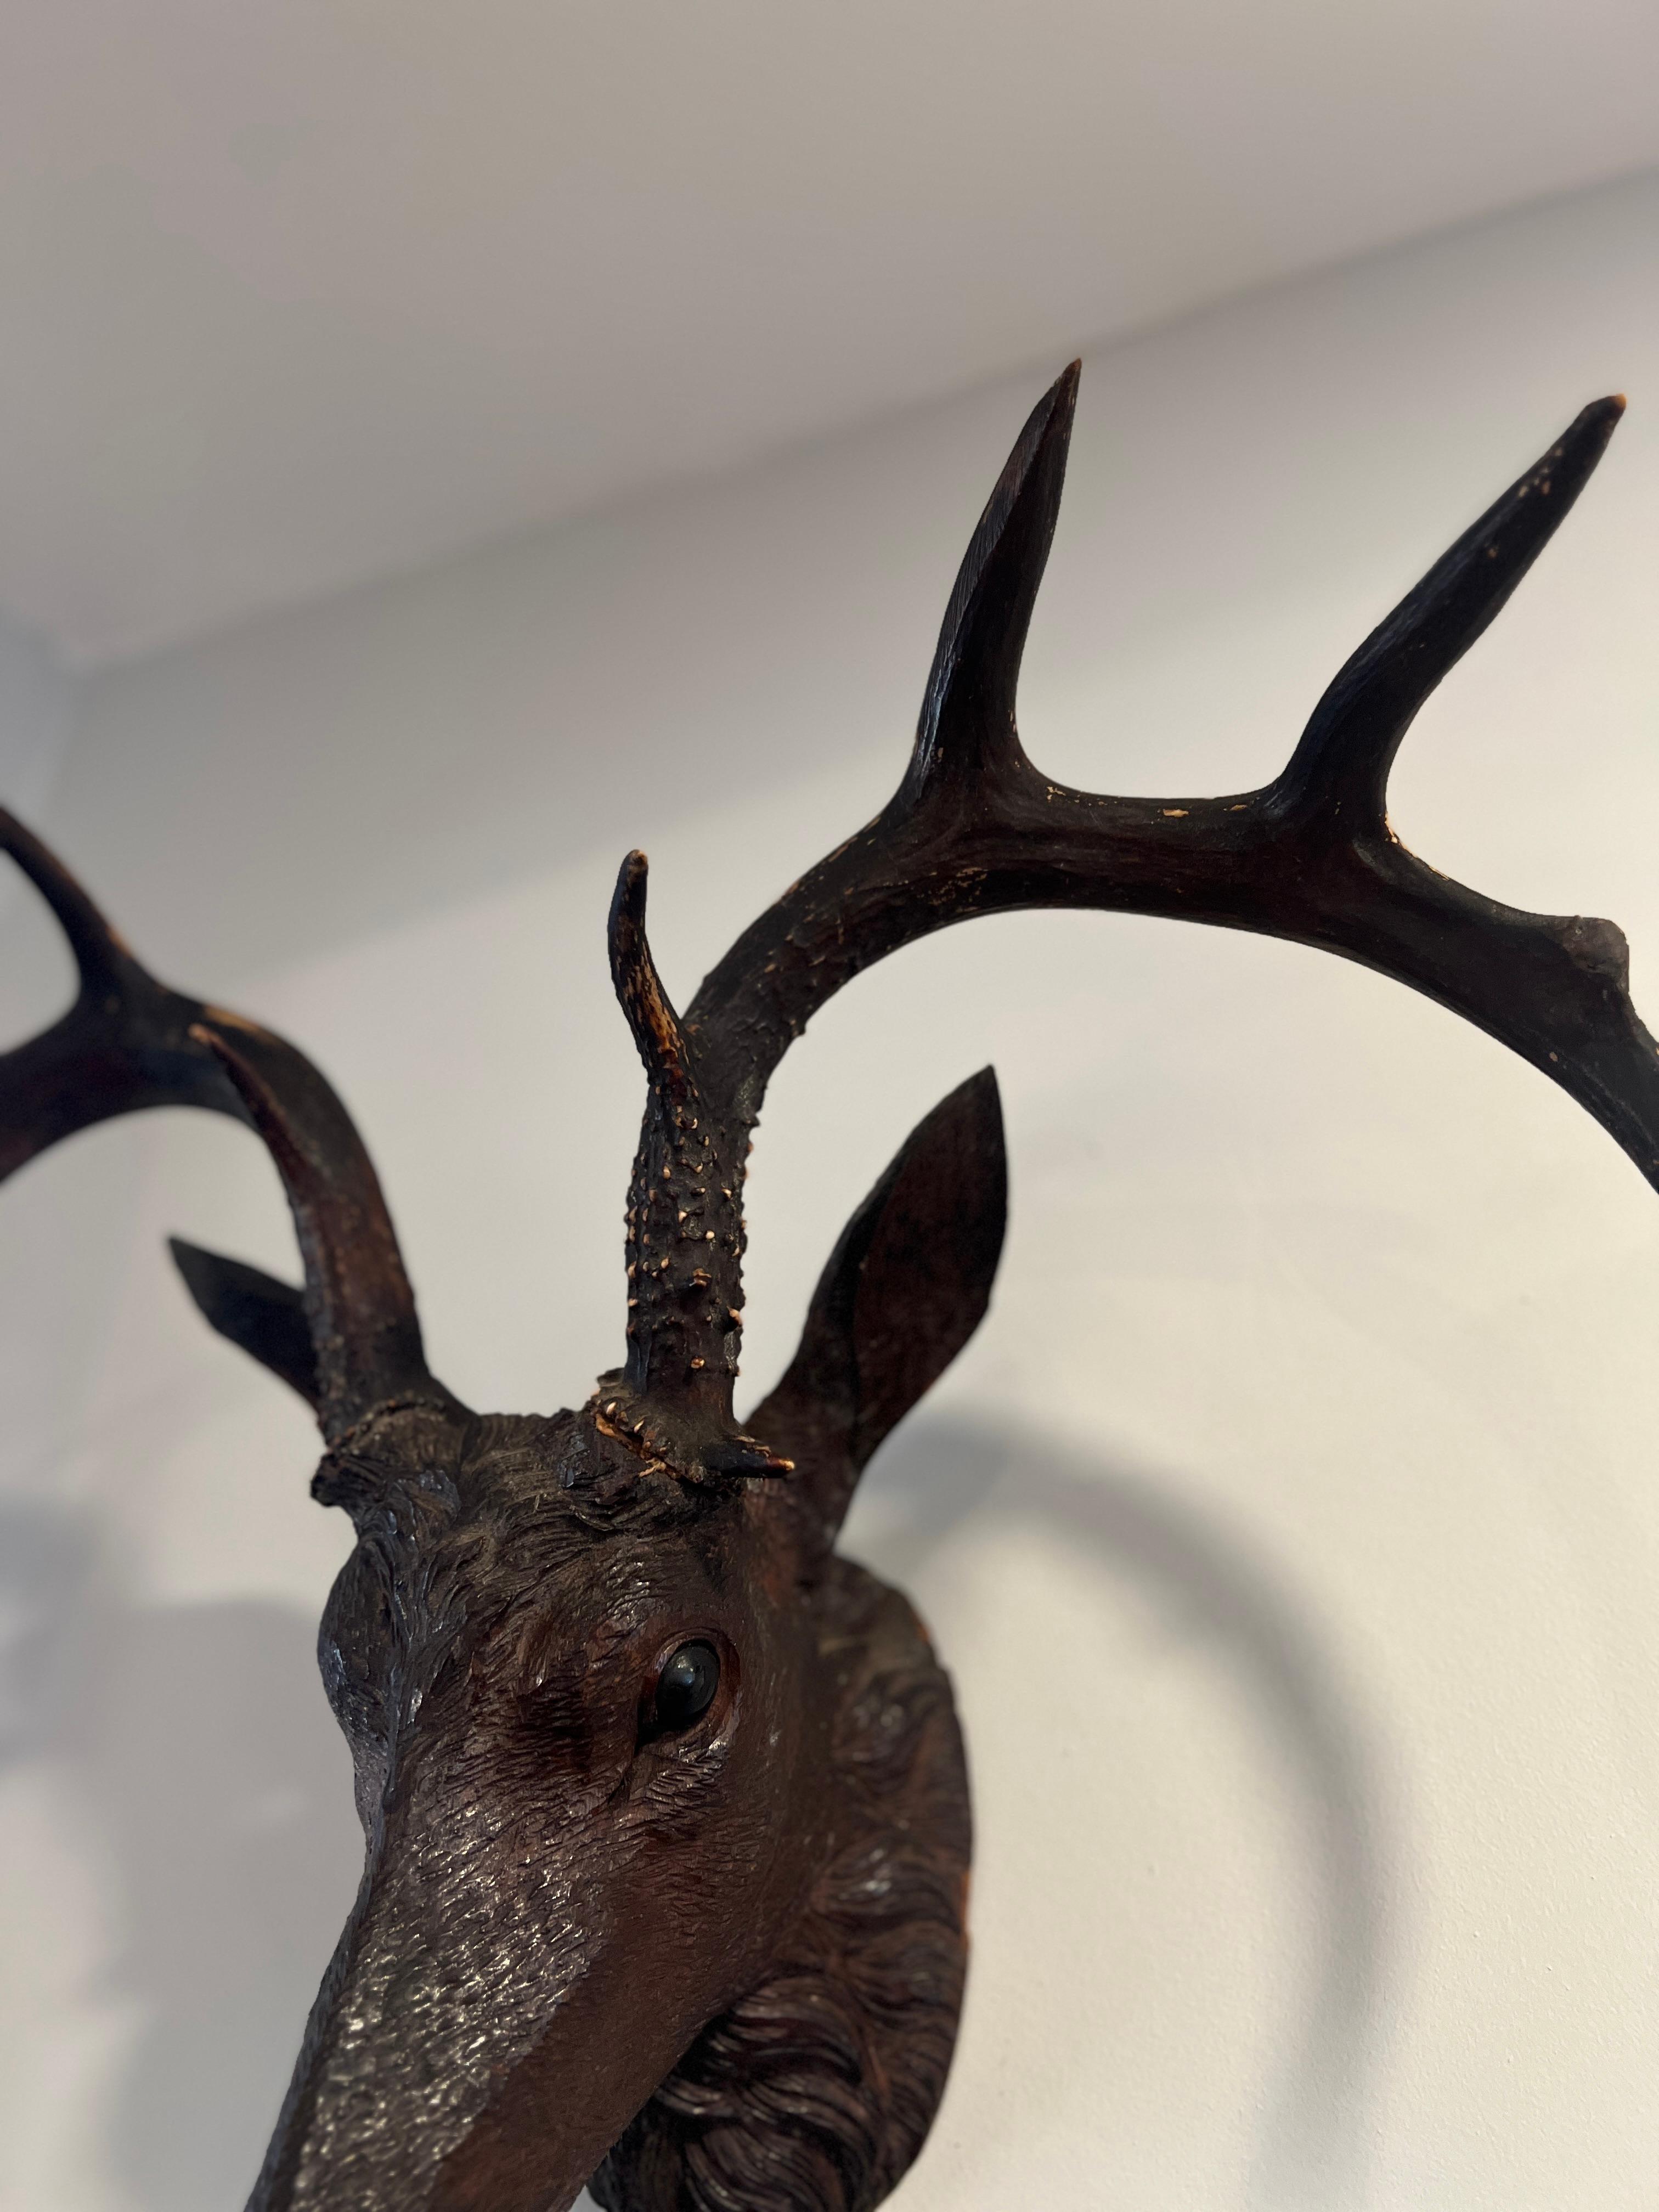 19th C Black Forest Stag Head Antler Wall Mount Deer Sculpture For Sale 1